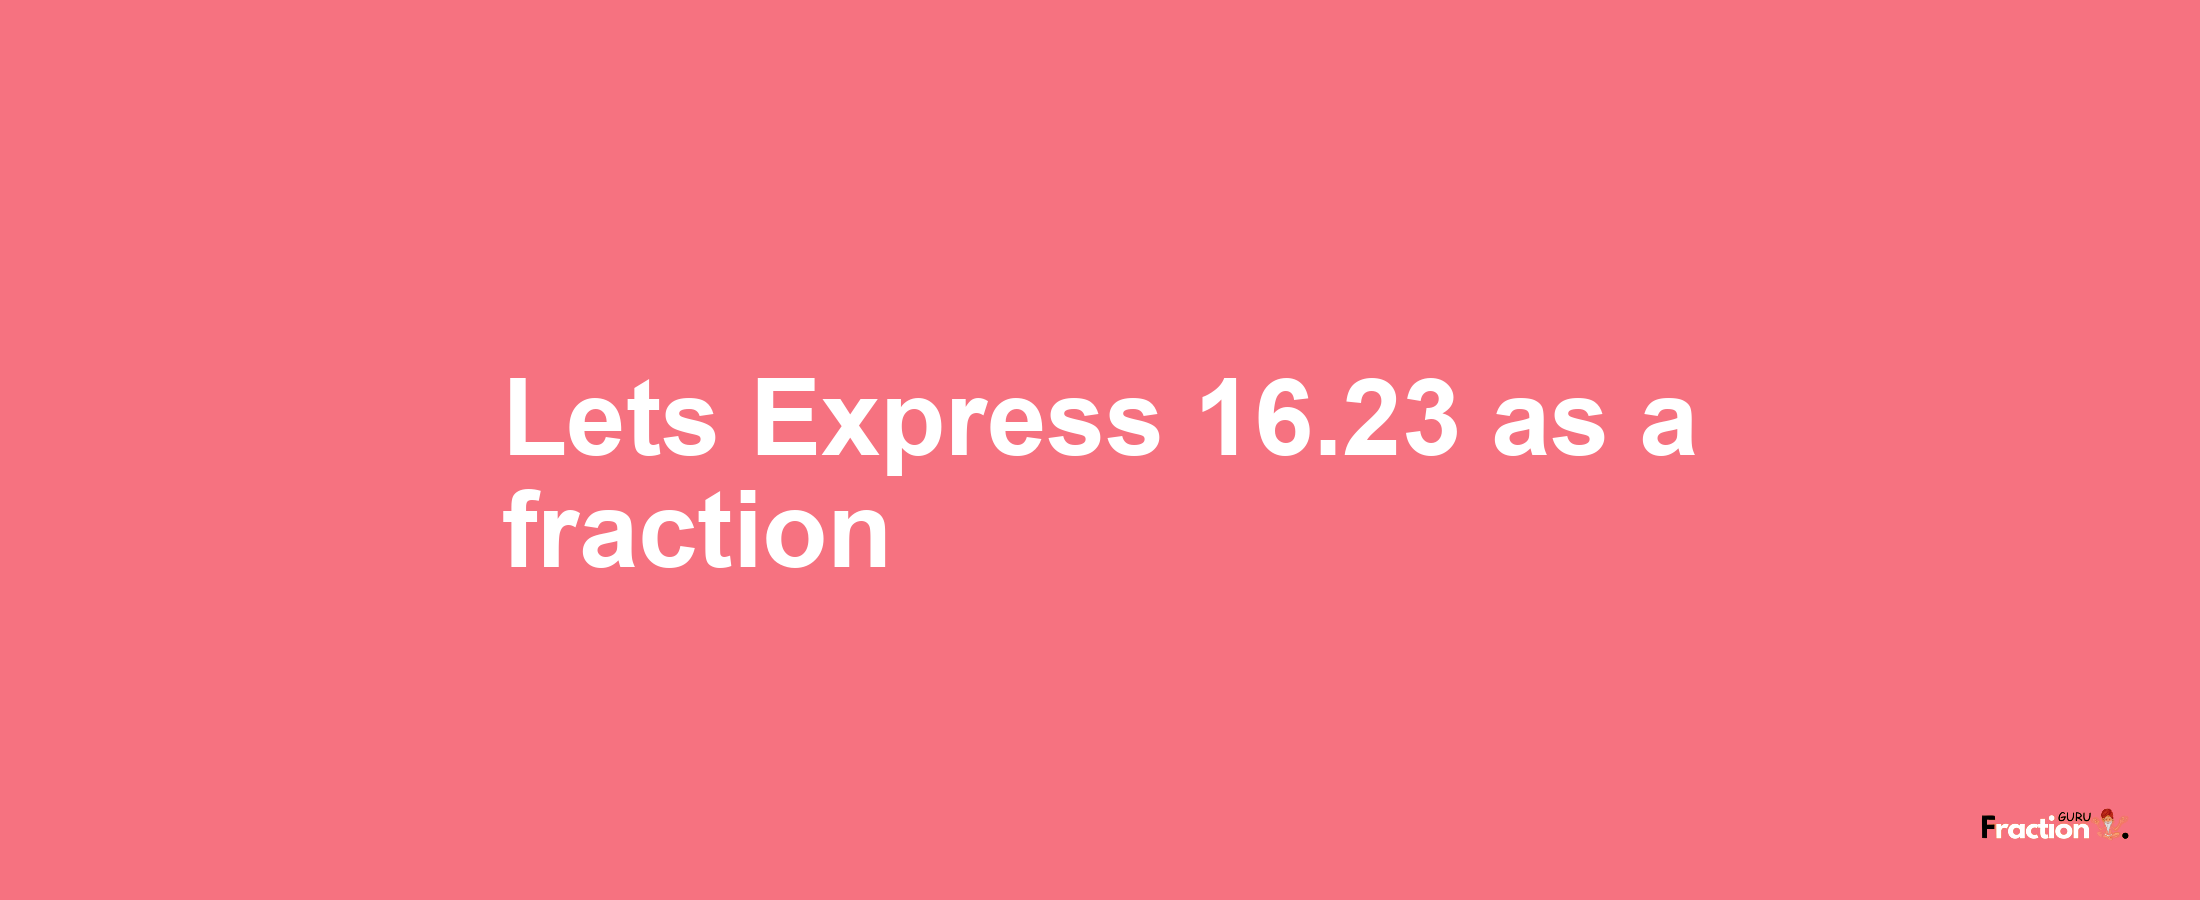 Lets Express 16.23 as afraction